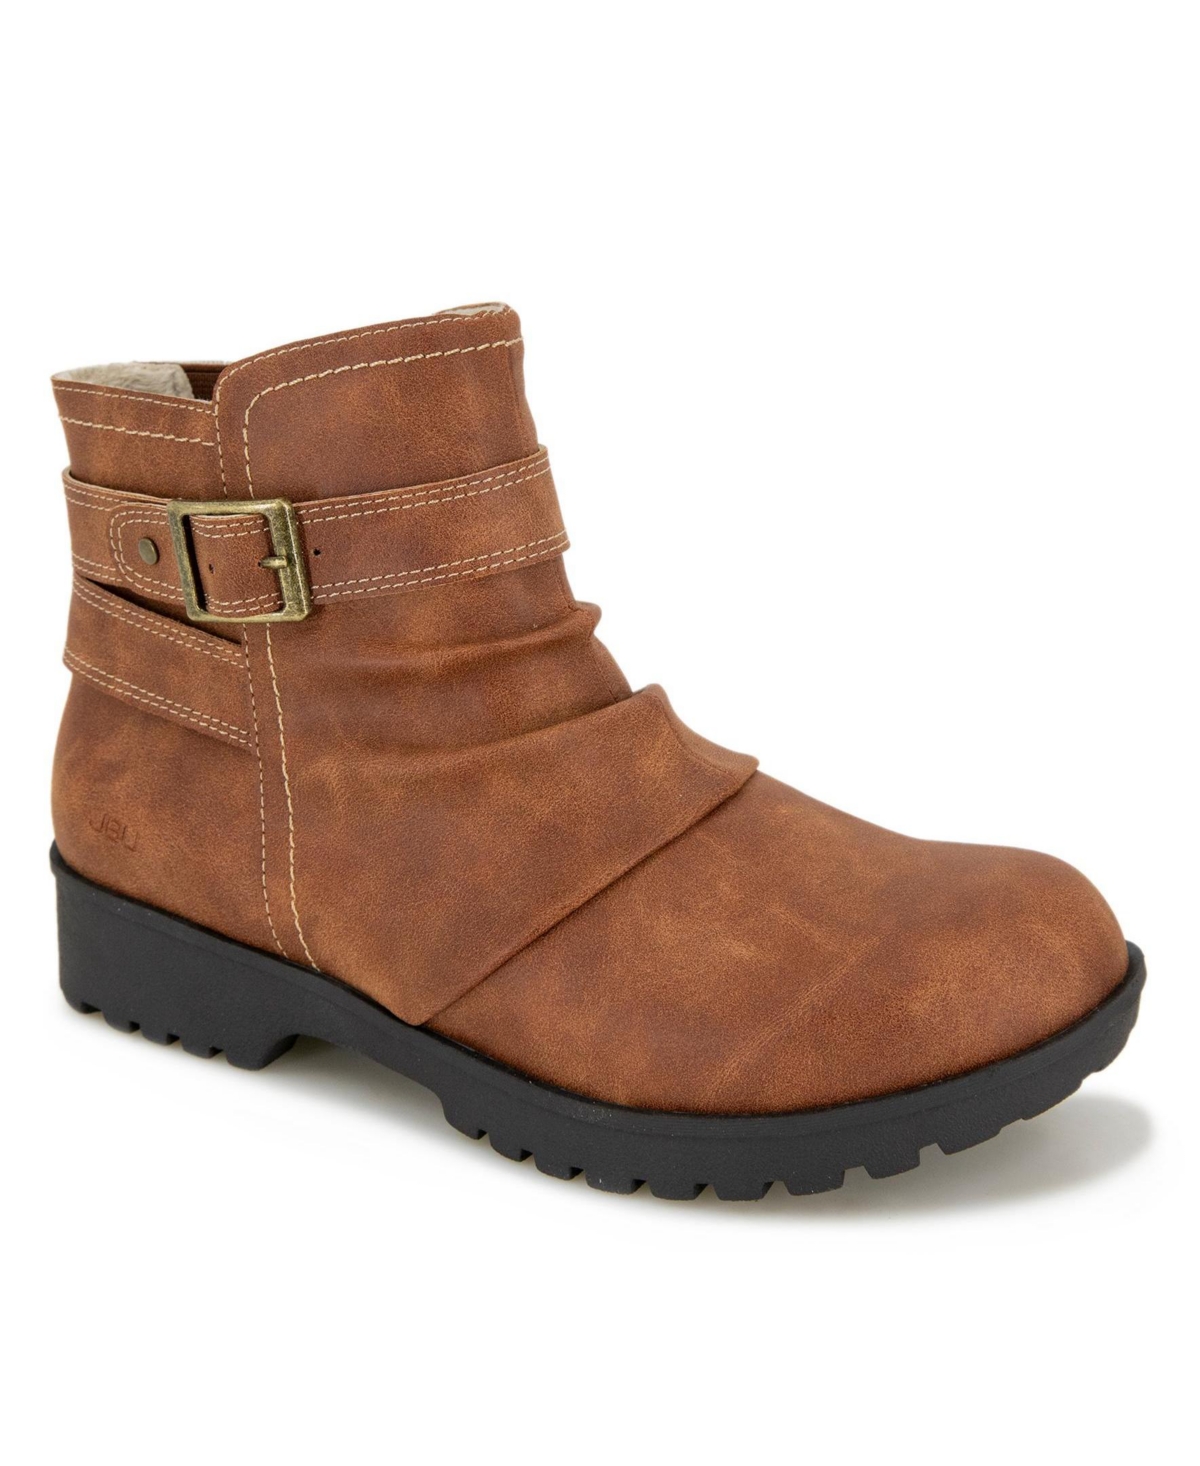 Women's Betsy Water Resistant Ankle Bootie - Whiskey